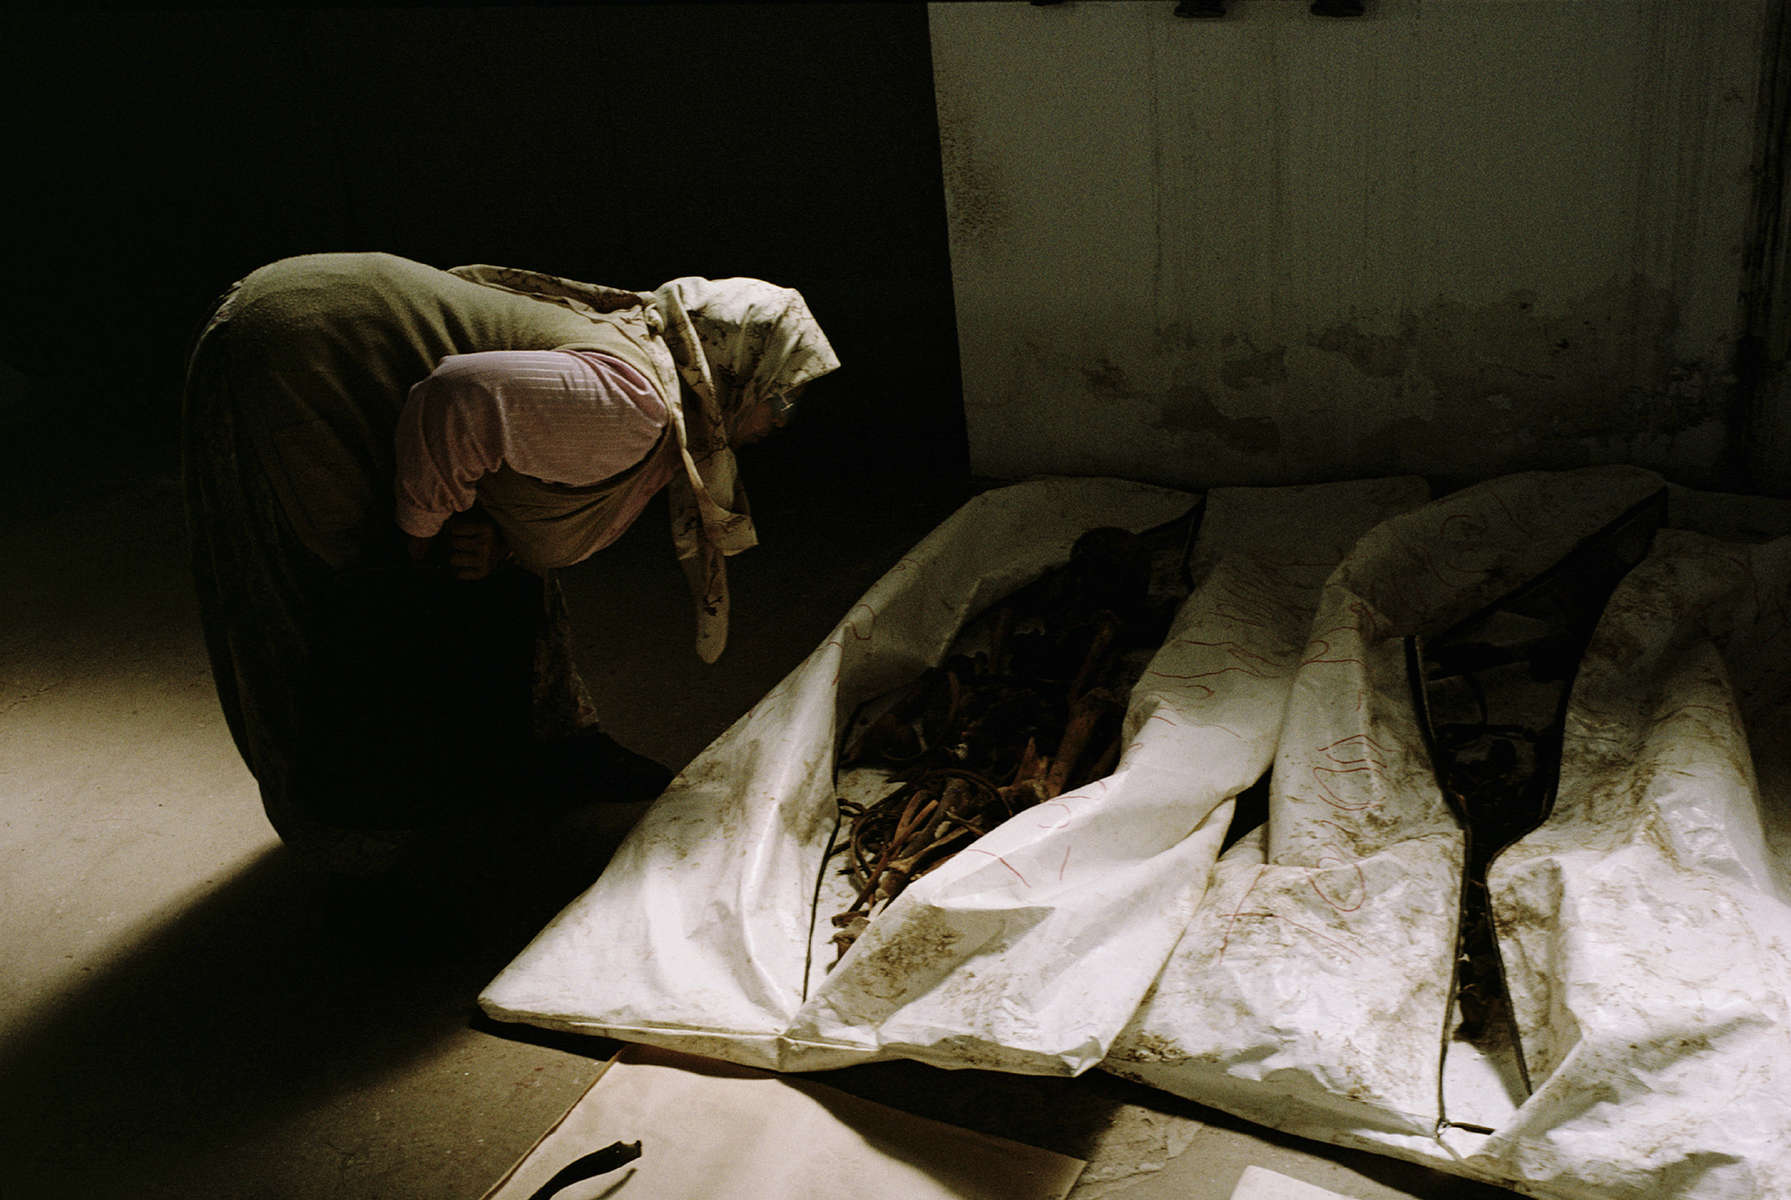 Muslim widow examines body bags containing the remains of recently exhumed victims of the 1992 \{quote}ethnic cleansing\{quote} campaign waged by Serbs against their Muslim neighbors. Exhumations of mass graves began in 1996 and are expected to last for many years to come. Nearly 30,000 Muslims -- most of them civilians -- were listed as missing at the end of the war; most are believed to have been victims of \{quote}ethnic cleansing.\{quote} July 2001